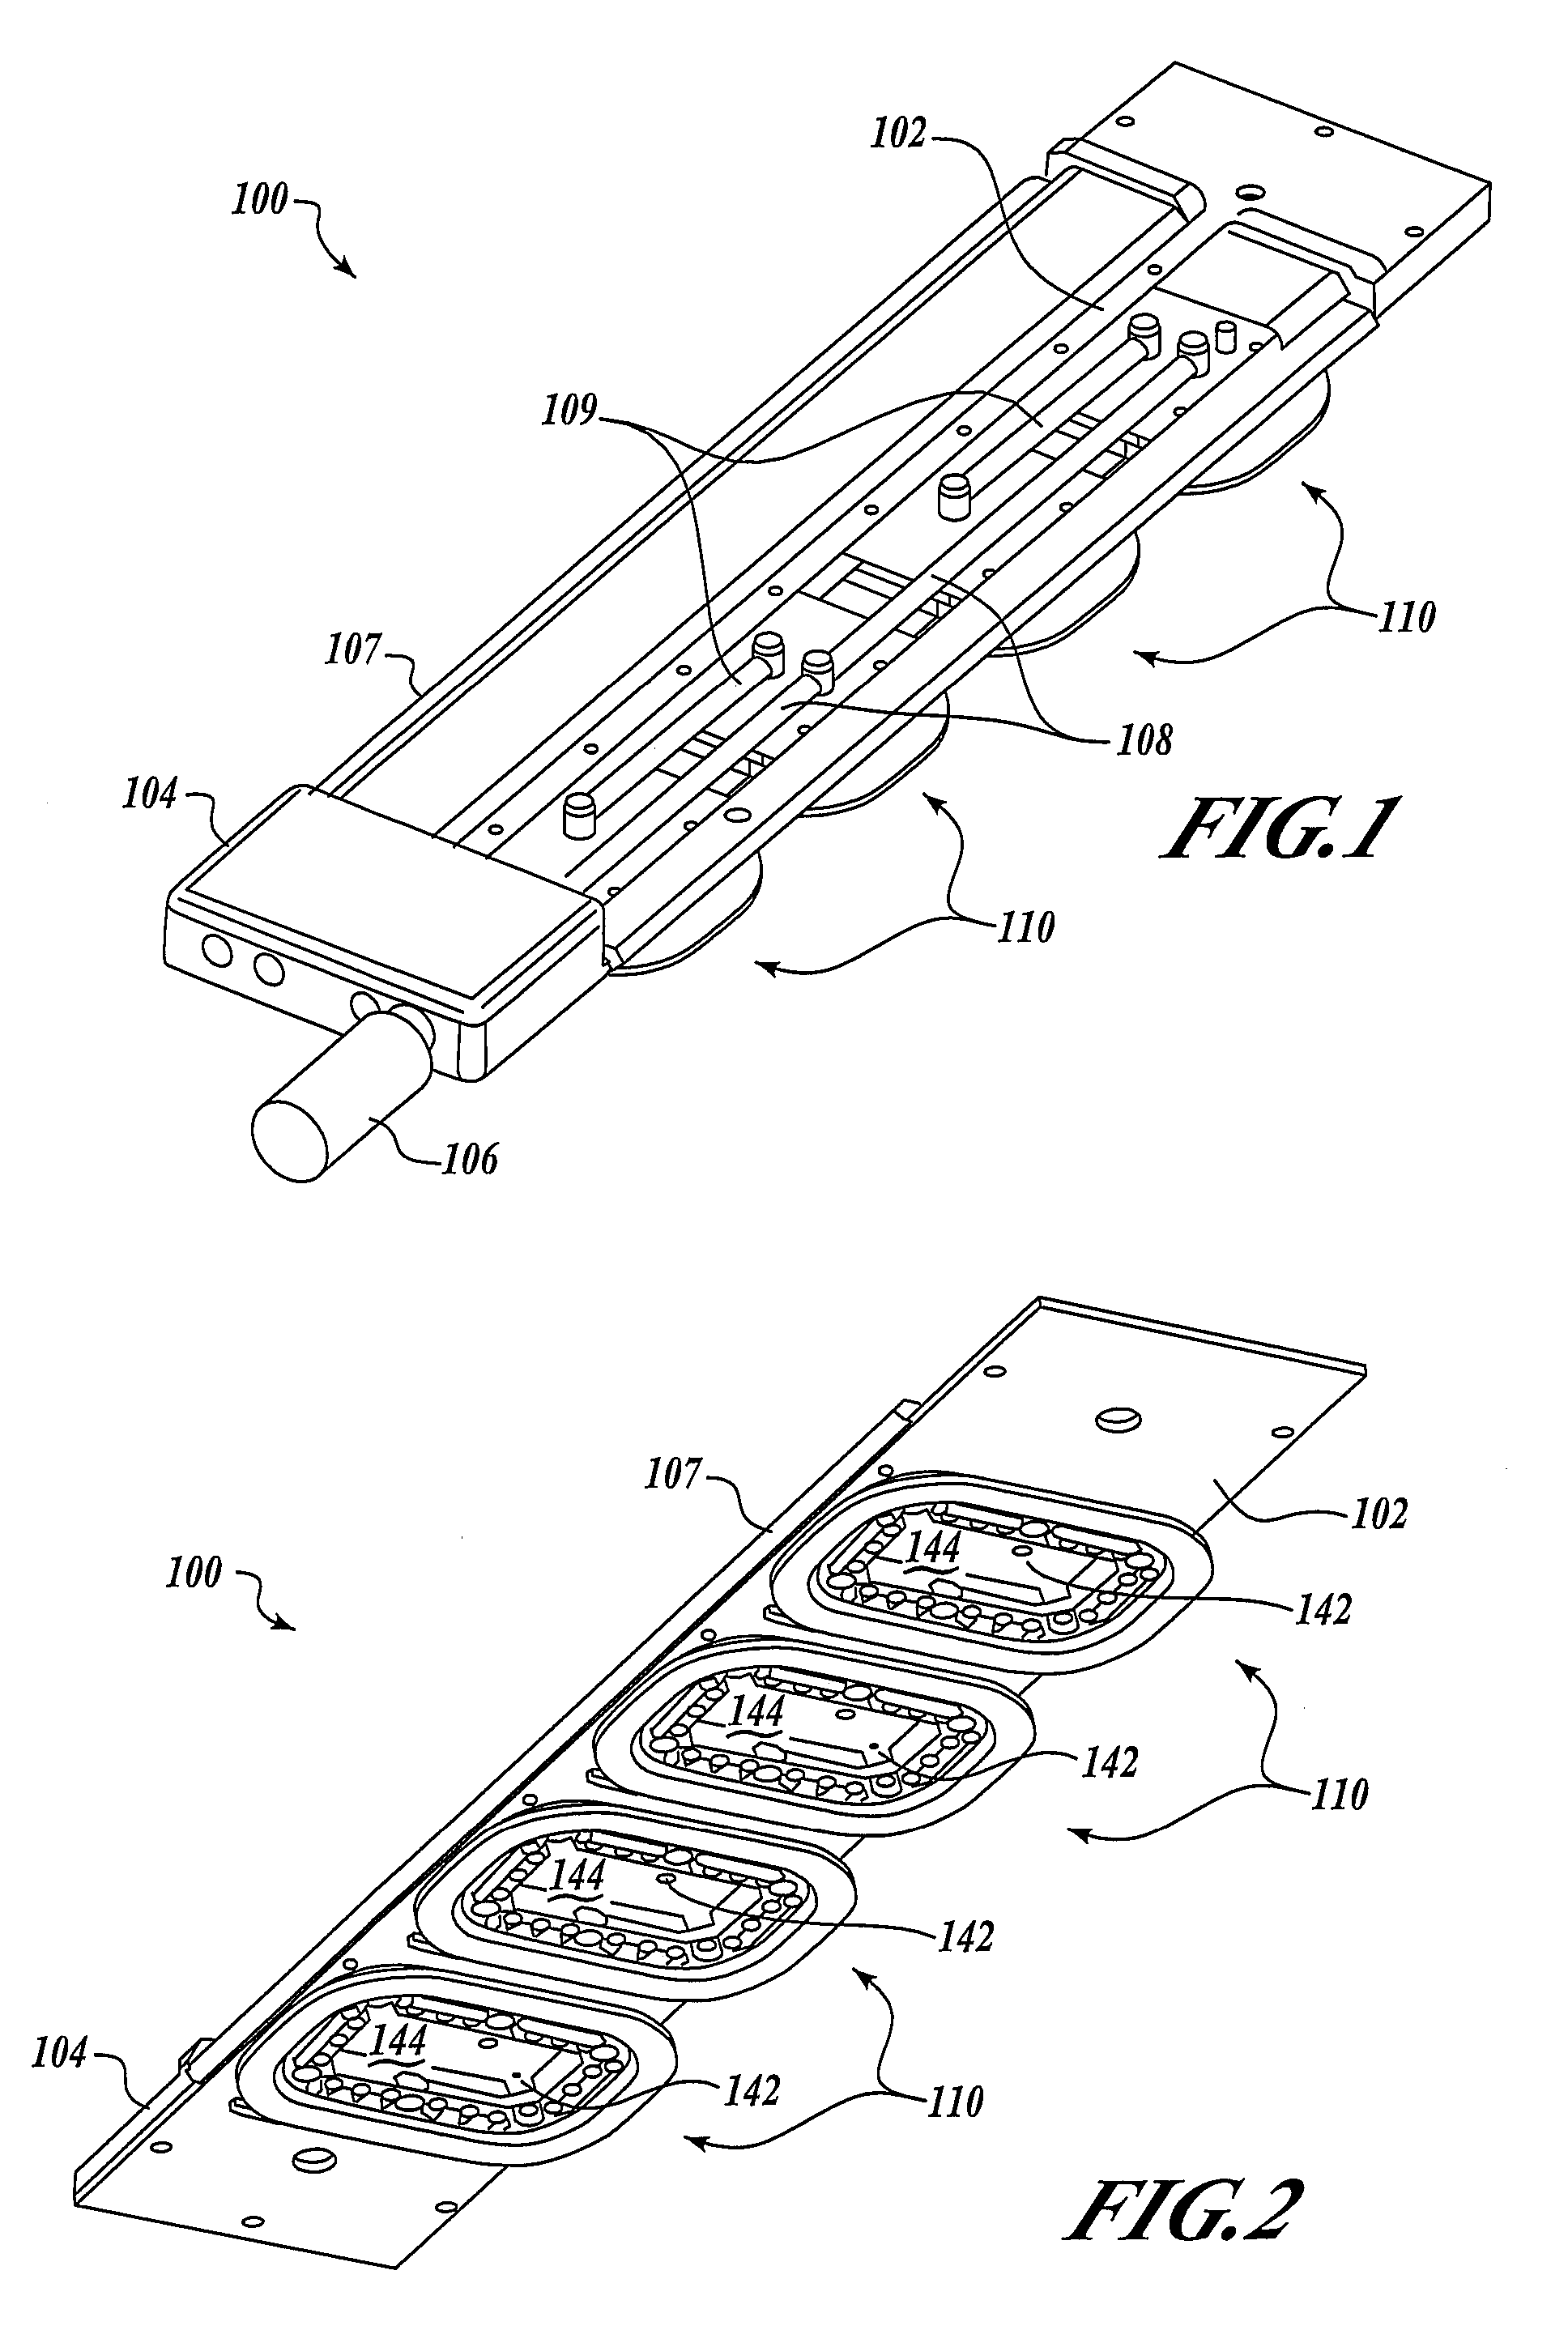 Apparatus and methods for manufacturing operations